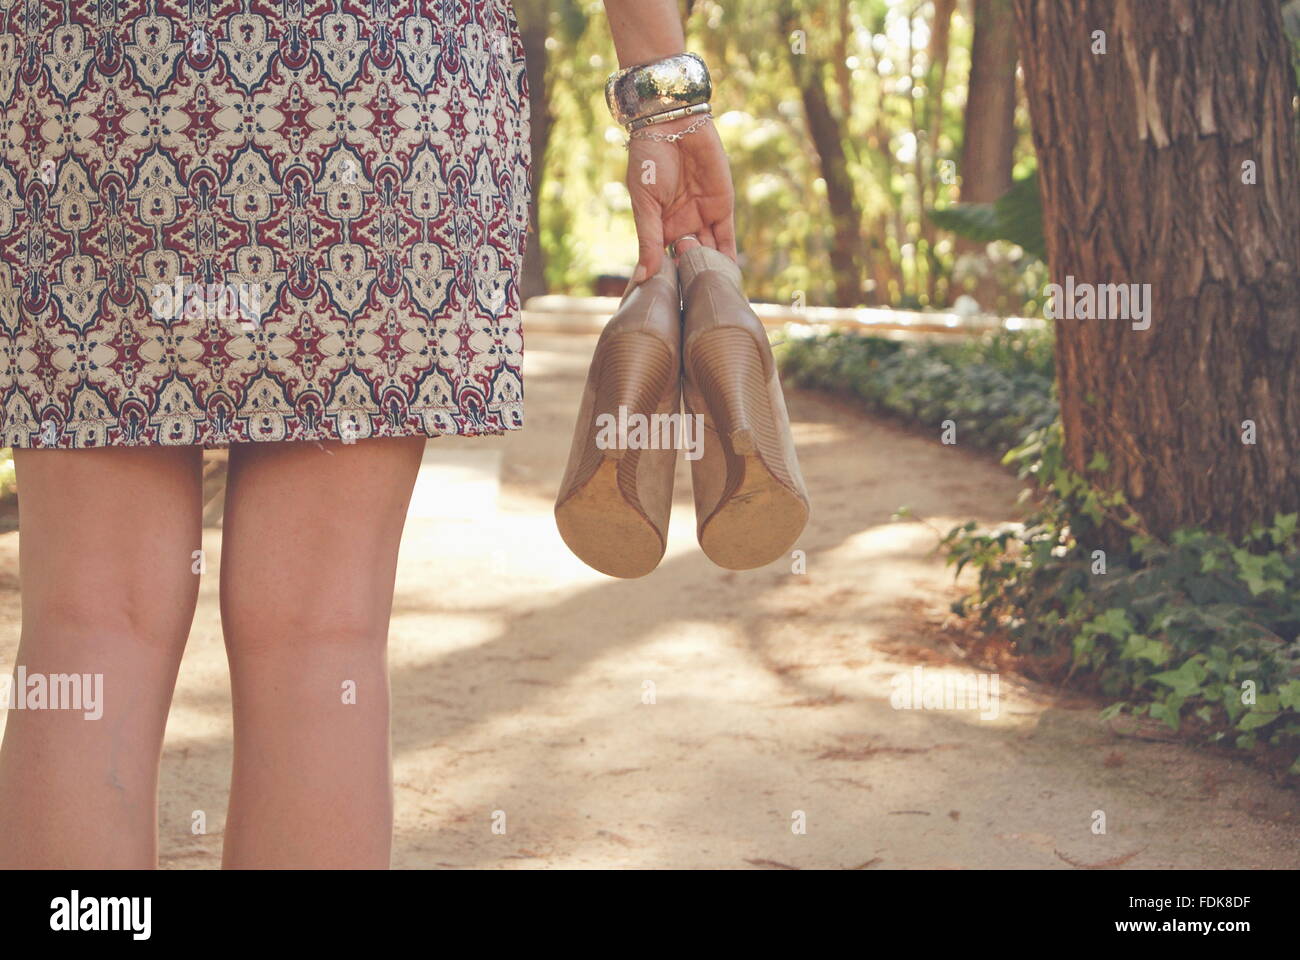 Rear view of a woman holding pair of shoes Stock Photo